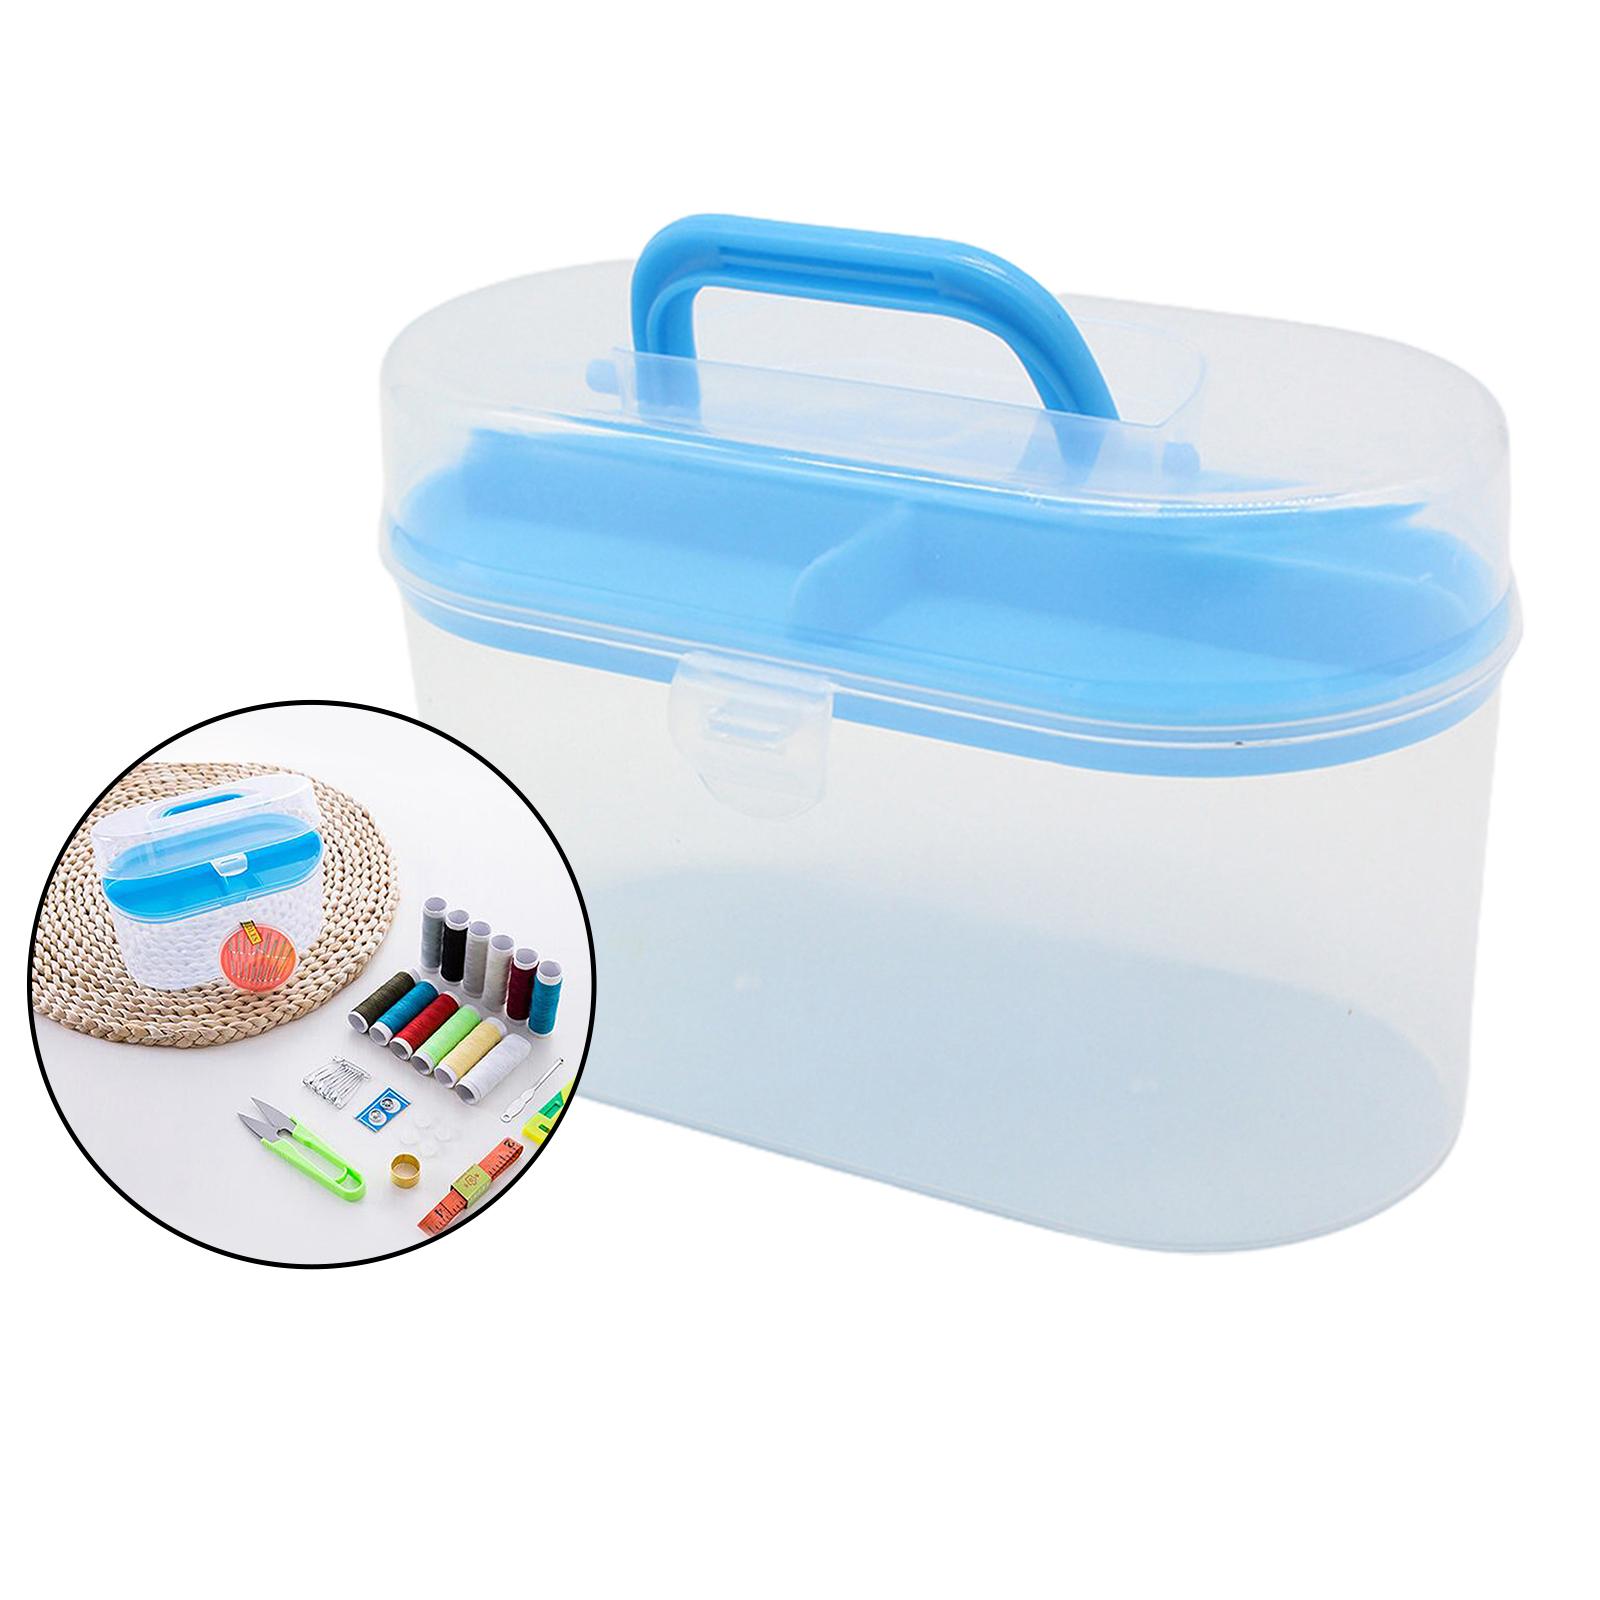 Container, Tool Box, Sewing Thread Spools Case, Cosmetic, Art Craft Organizer A - image 5 of 10